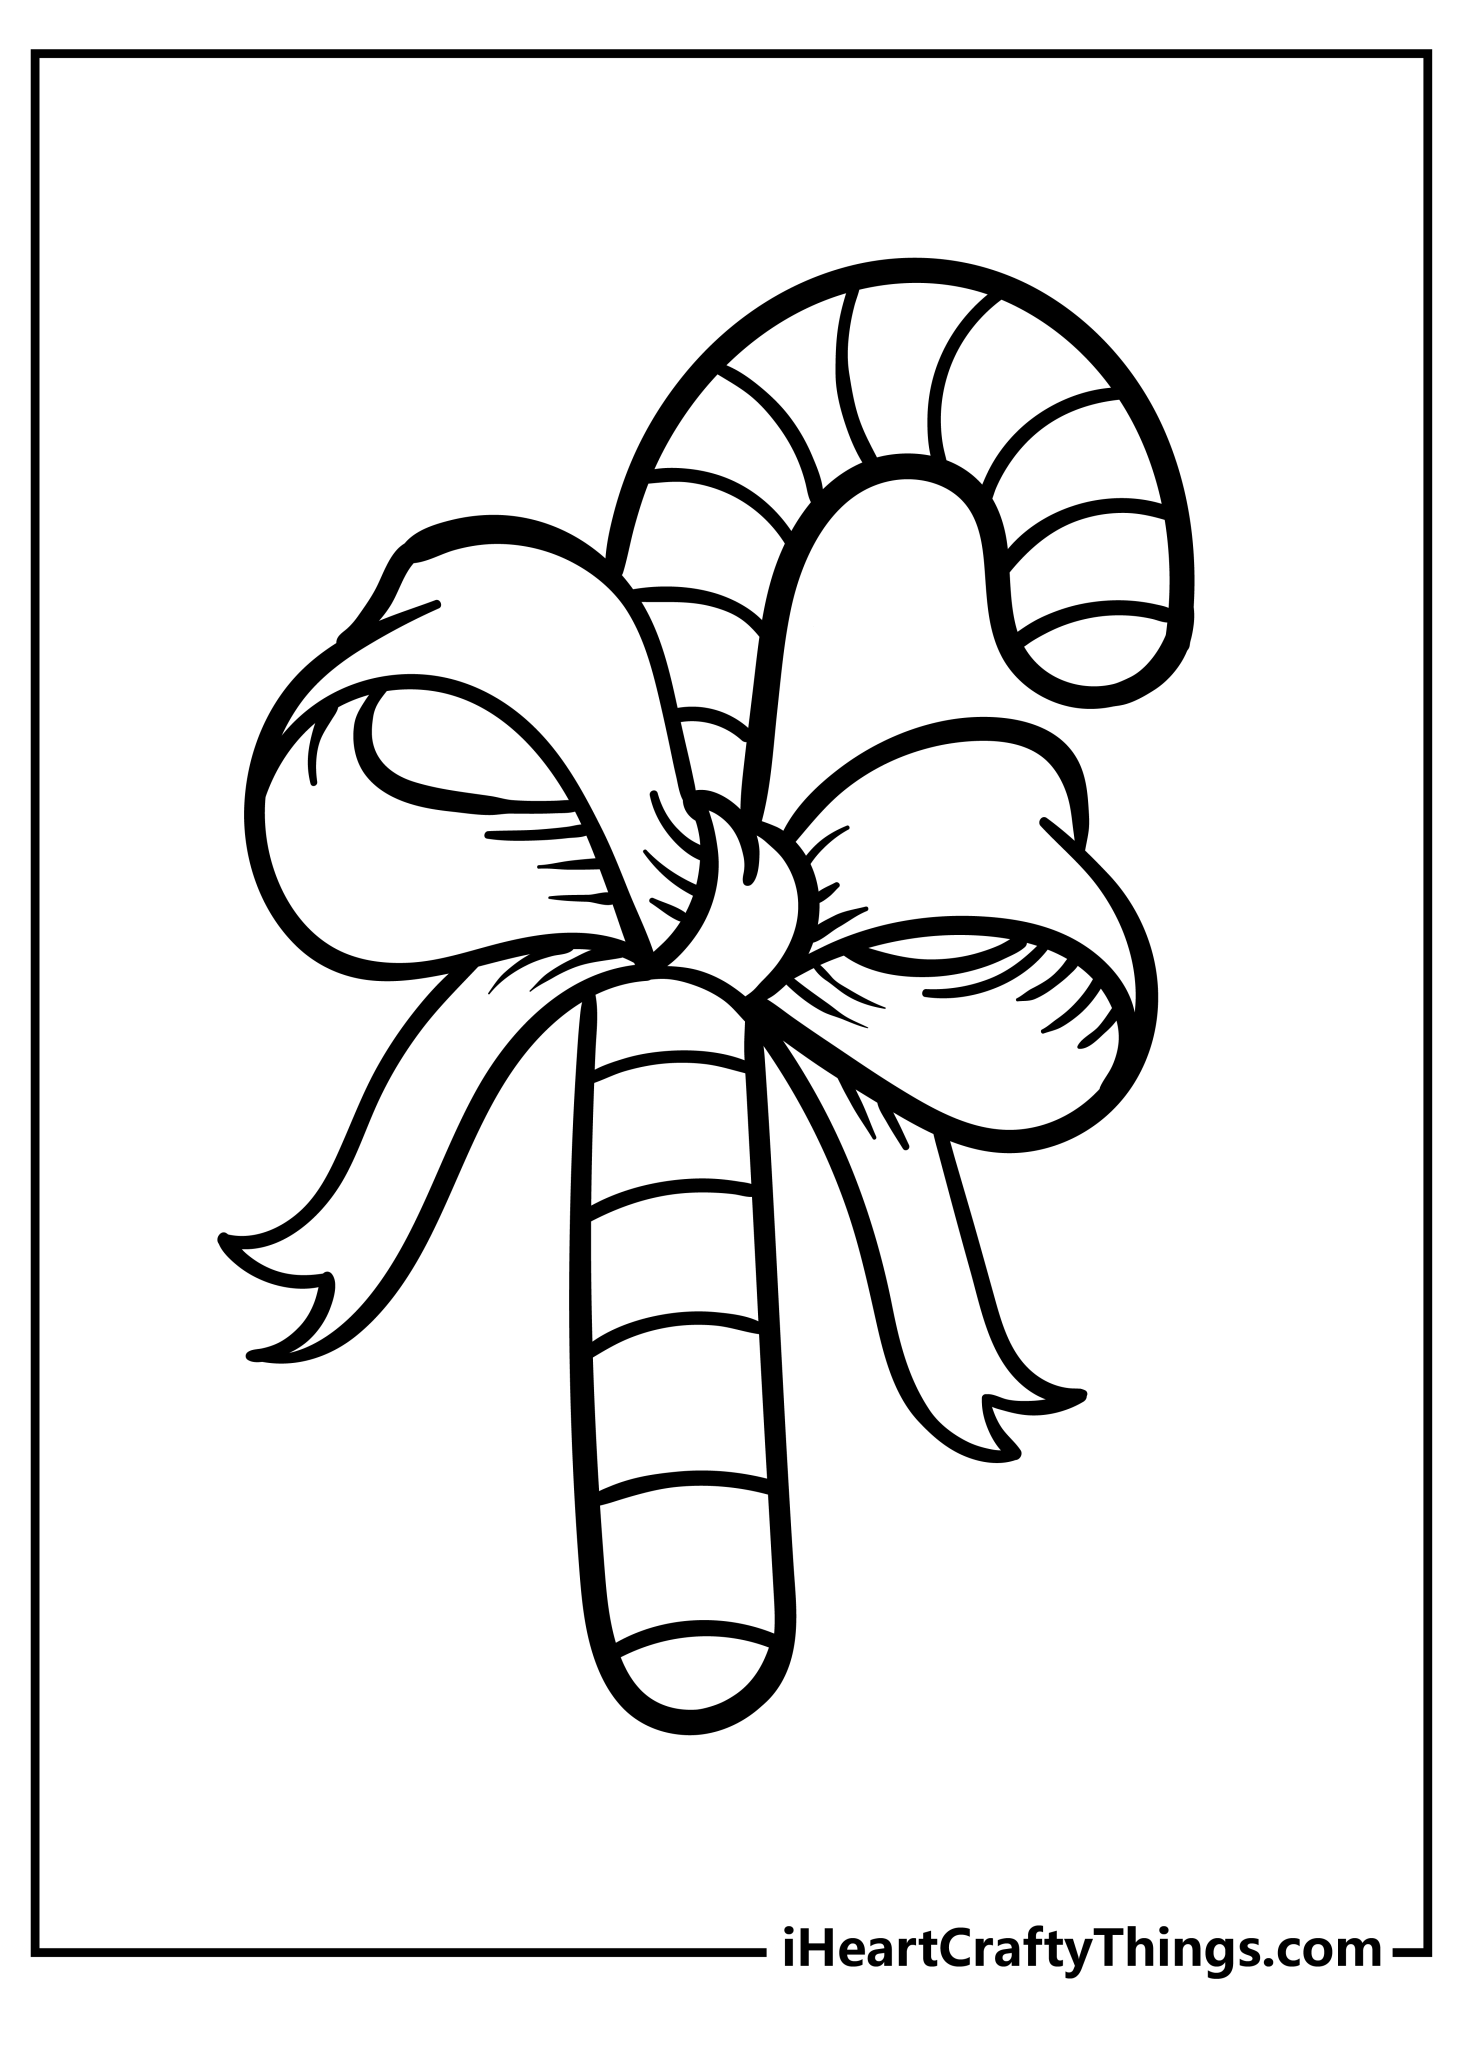 Candy Cane Coloring Pages (100% Free Printables)